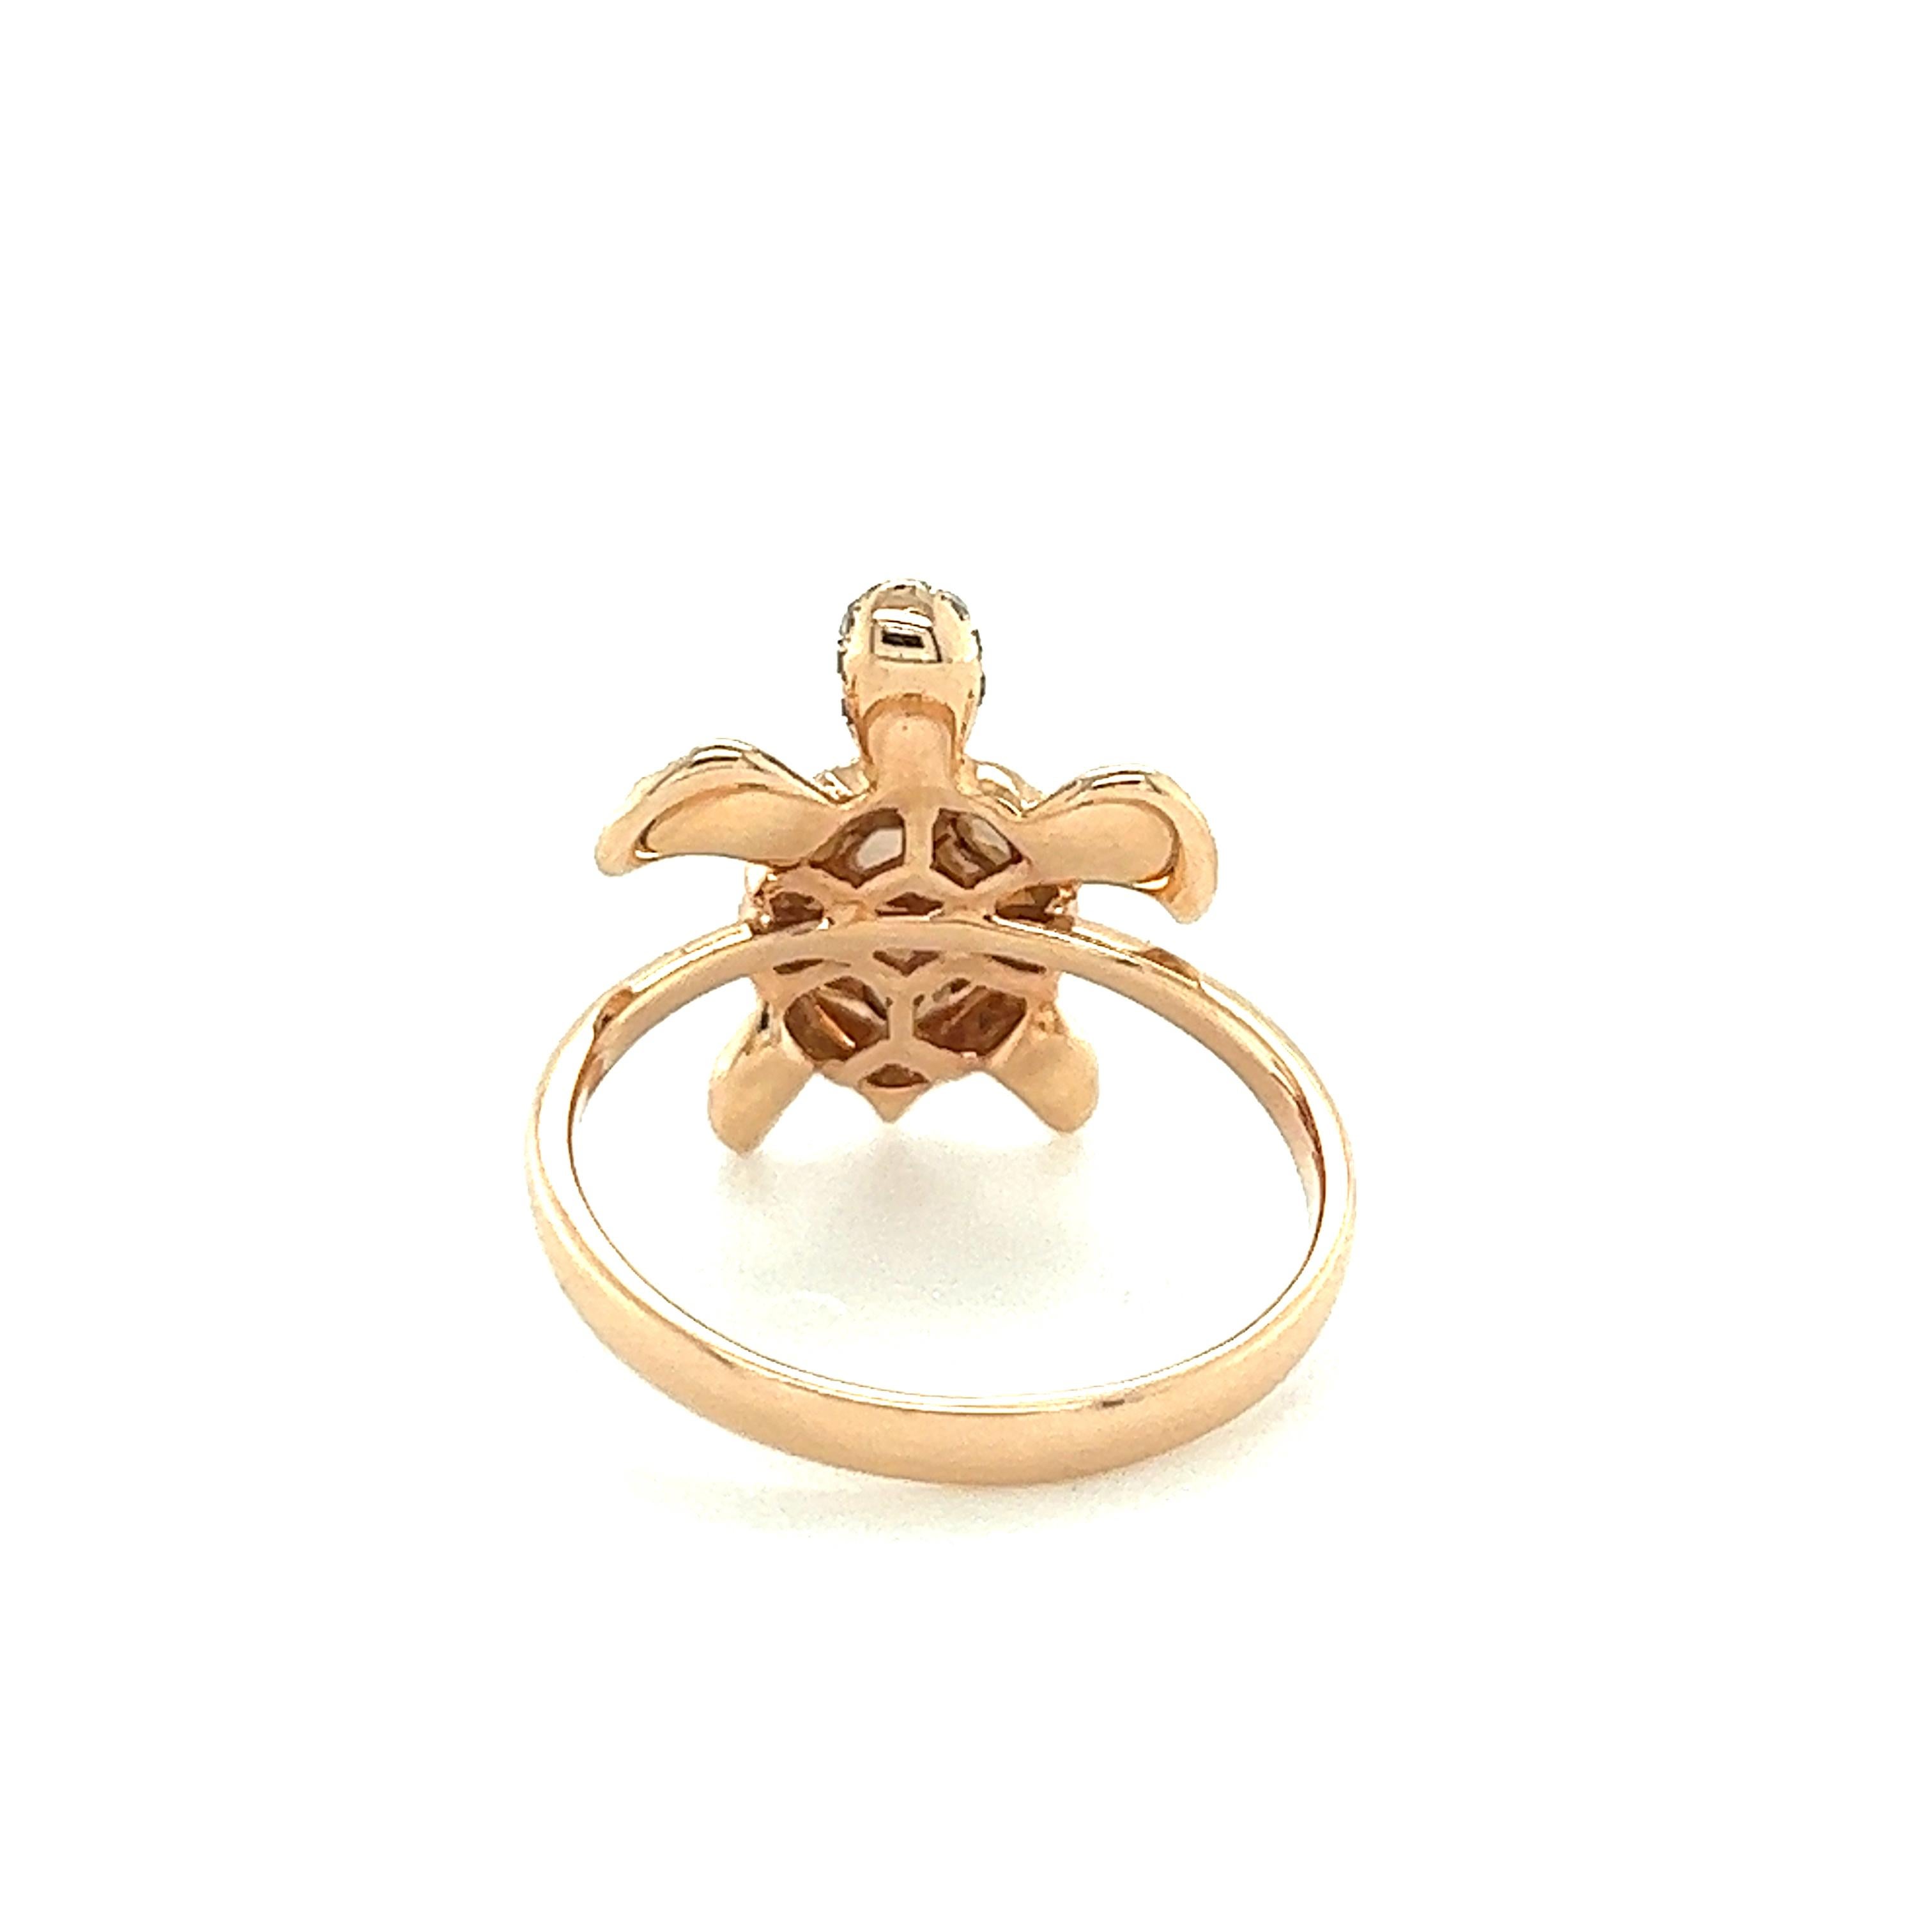 18 K White Gold White Pearl Tortoise Ring

40 Diamonds 0.17 CT
2 Rubies 0.01 CT
7 White Pearls 0.30 CT
18 K Rose Gold 3.54GM

The pearl meaning is centered around purity, balance, and inner wisdom. Pearls have long been a source of pure fascination.